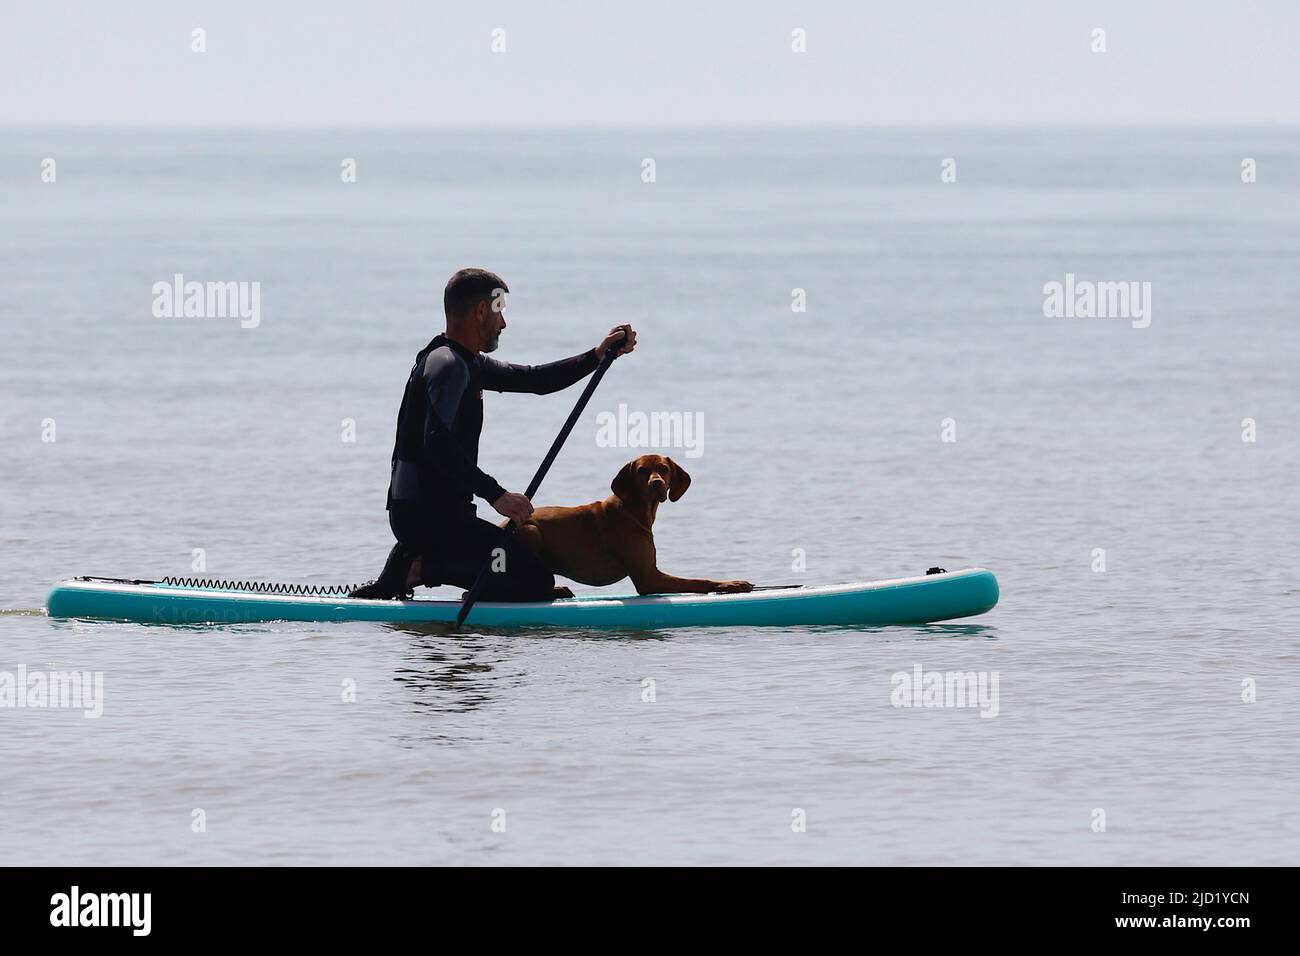 Hastings, East Sussex, UK. 17 Jun, 2022. UK Weather: Very hot and sunny at the seaside town of Hastings in East Sussex as Brits enjoy the very hot weather today that is expected to reach 34c in some parts of the UK. Paddle boarder and dog enjoy the gentle waves. Photo Credit: Paul Lawrenson /Alamy Live News Stock Photo